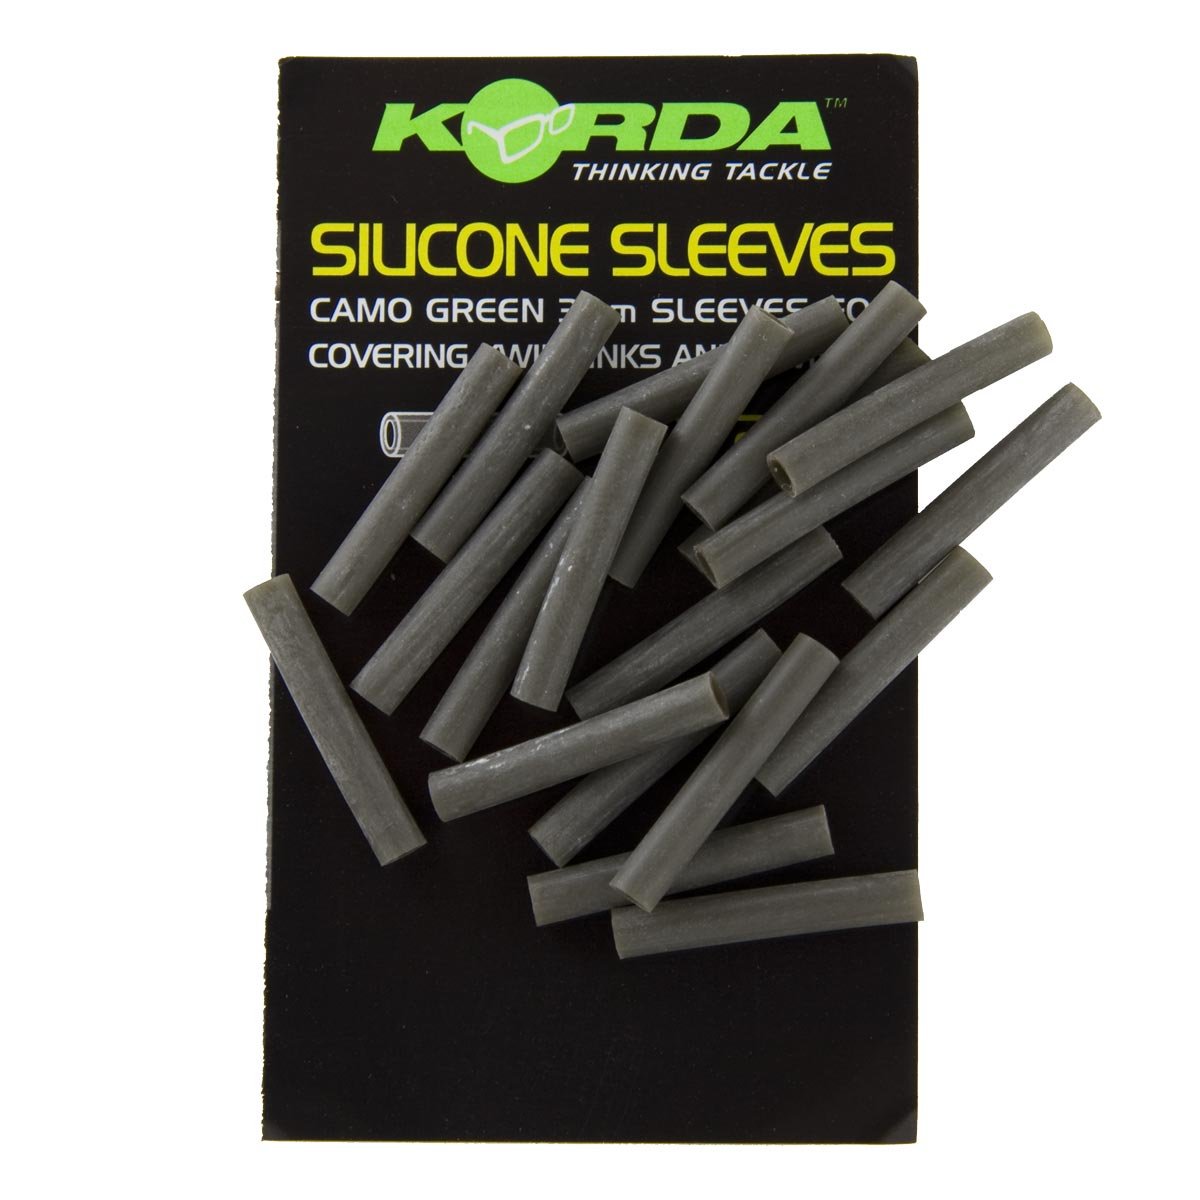 Silicone sleeves 20st